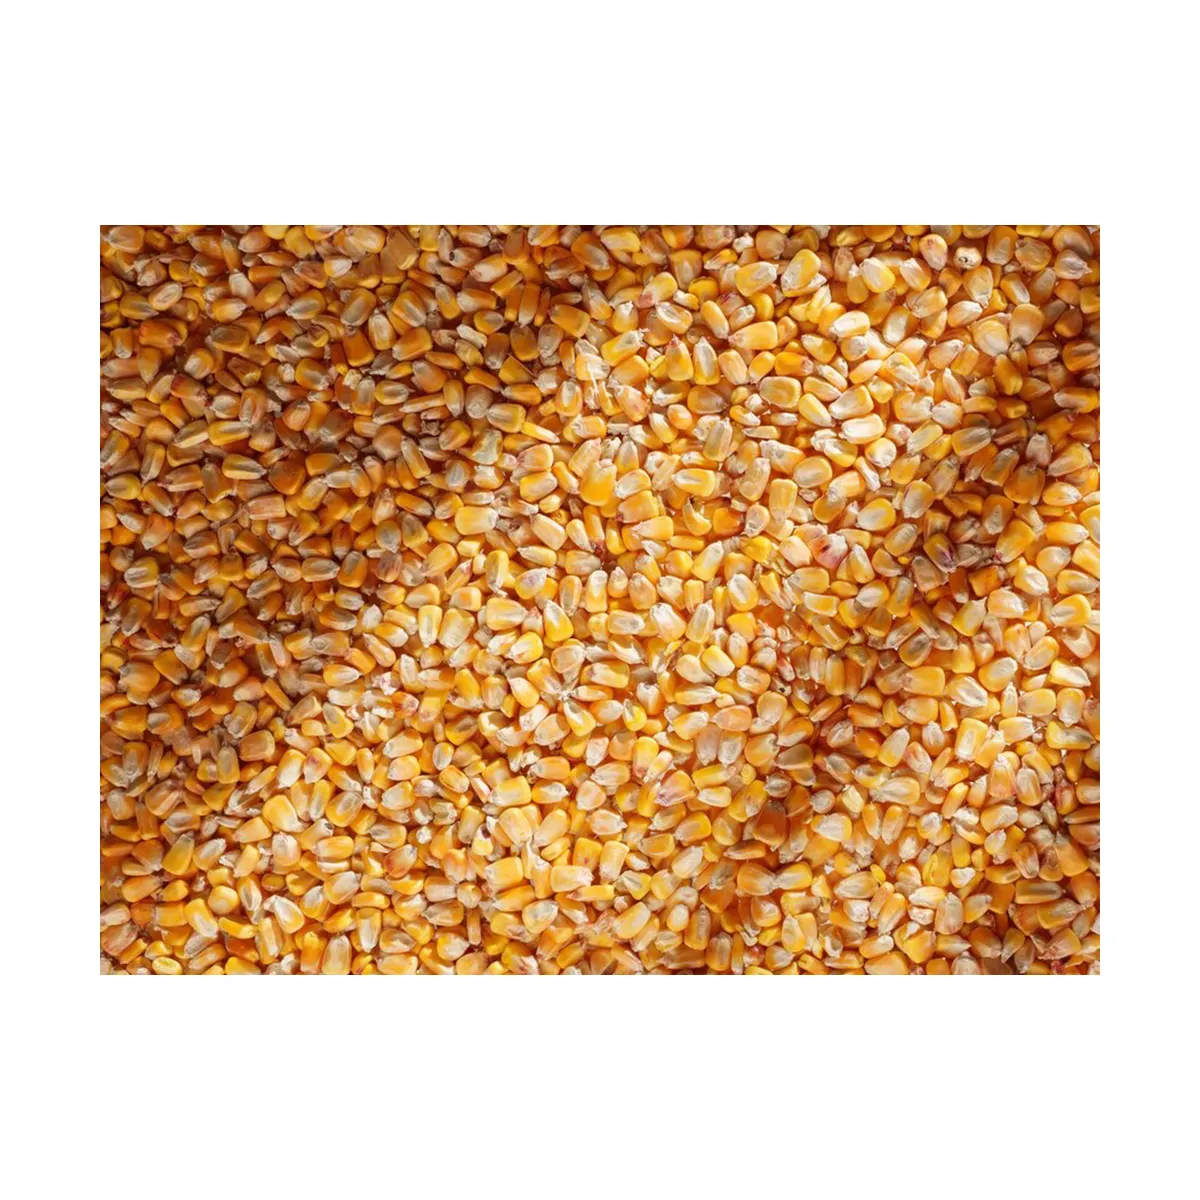 Non-GMO food-grade eco product ISO 22000 certified high nutrition Maize dry yellow corn for food and animal feed